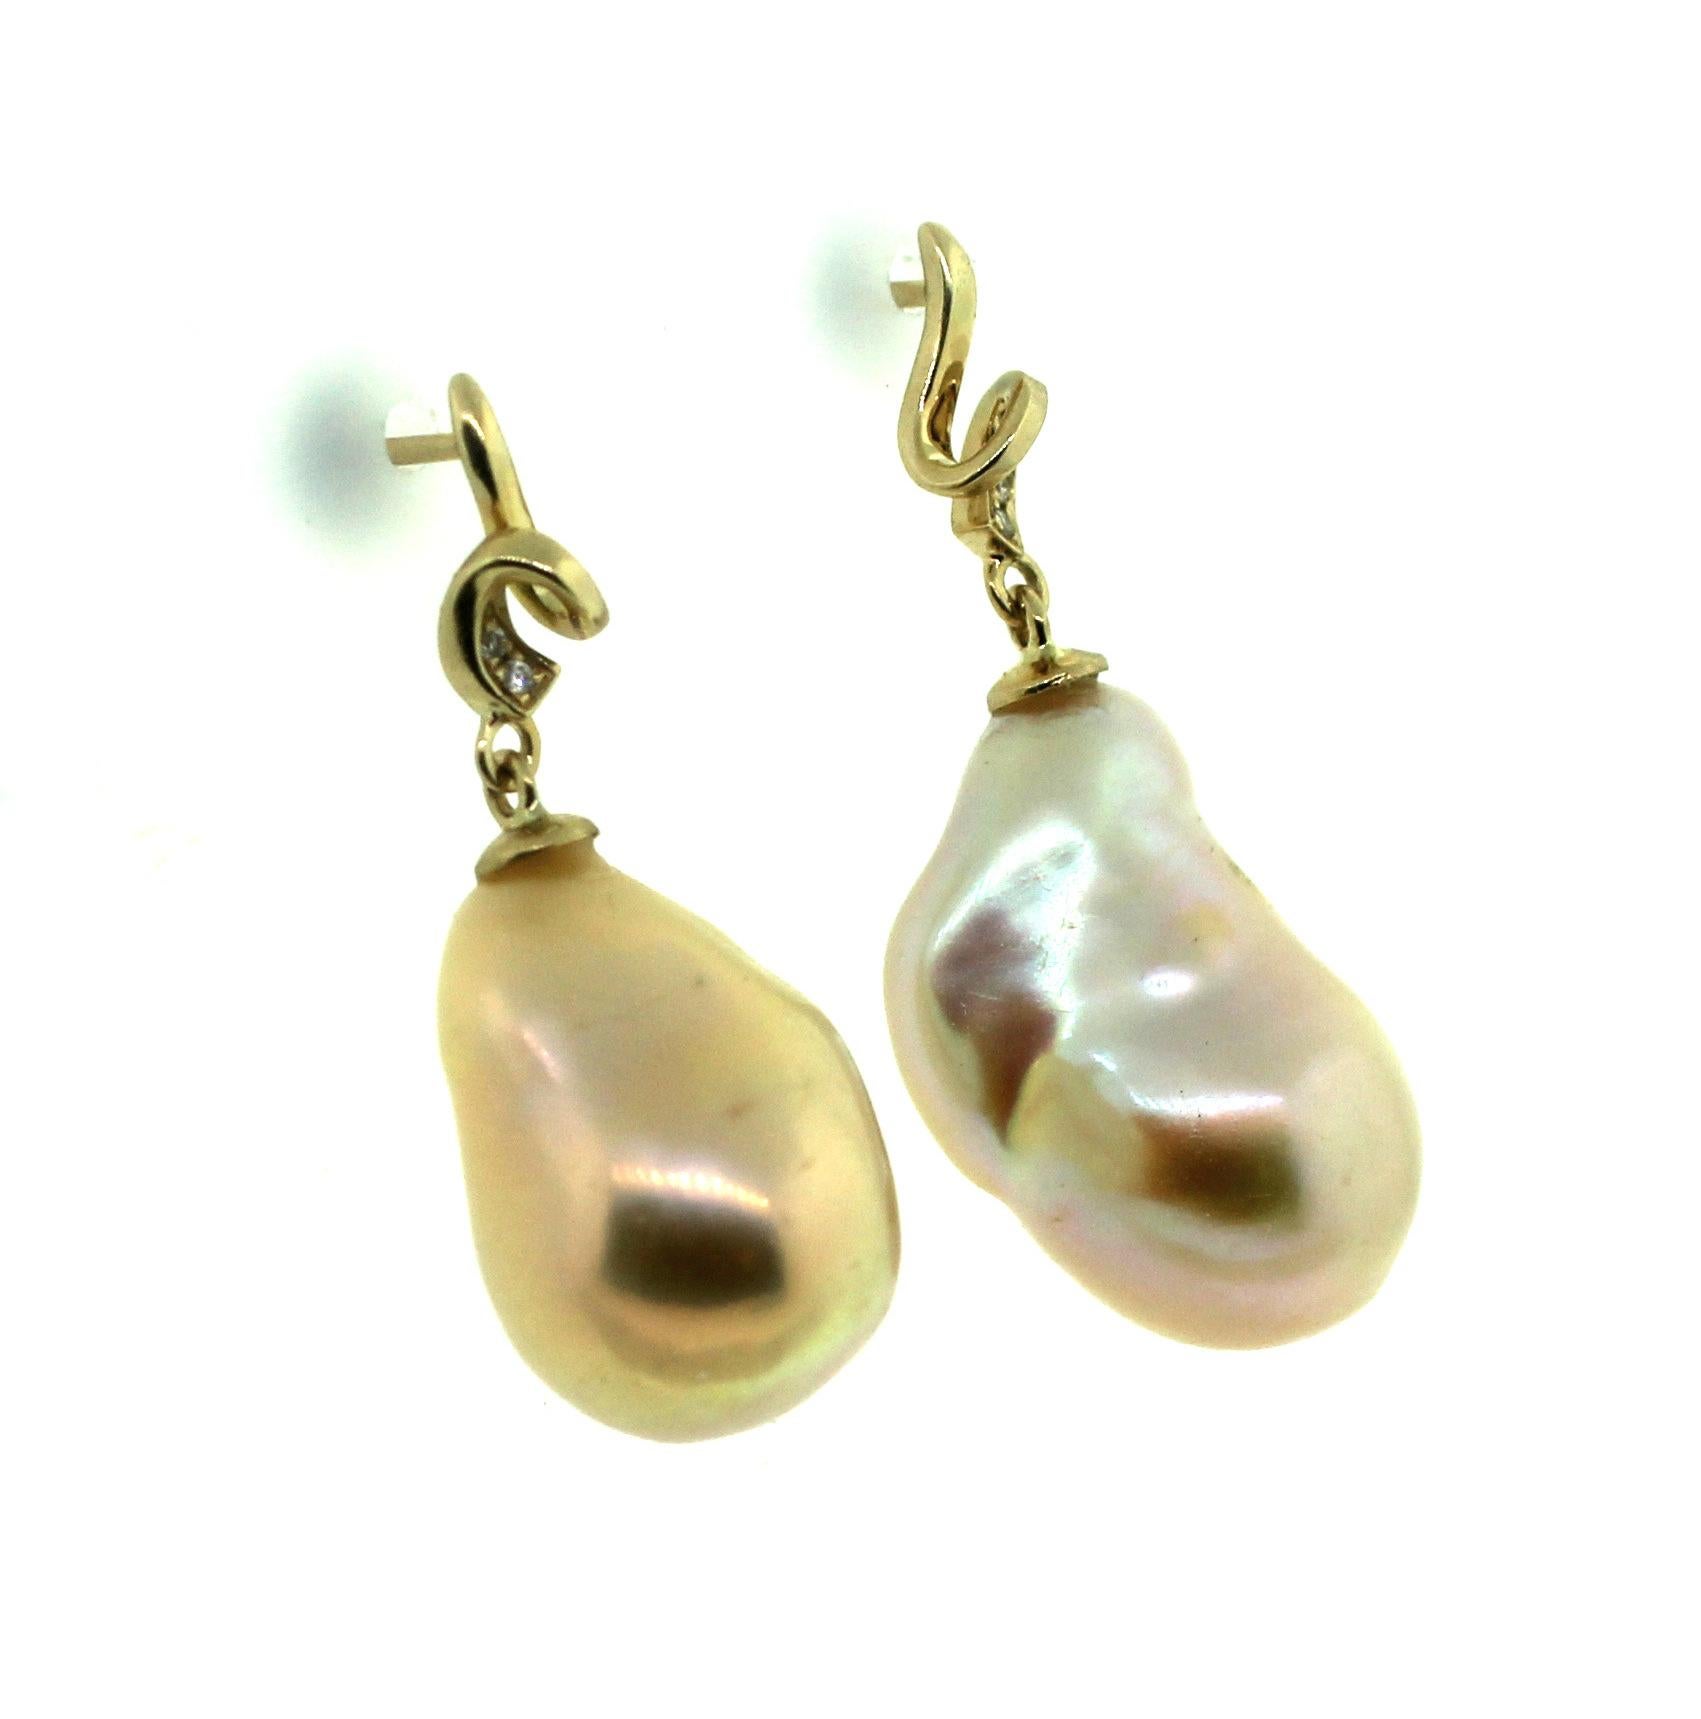 Hakimoto By Jewel Of Ocean
18K Yellow Gold And Diamonds
Total item weight 6.6 grams
11x17 mm Cultured Baroque Cultured Pearls
18K White Gold High Polish
Orient: Very Good
Luster: Very Good
Nacre: Very Good